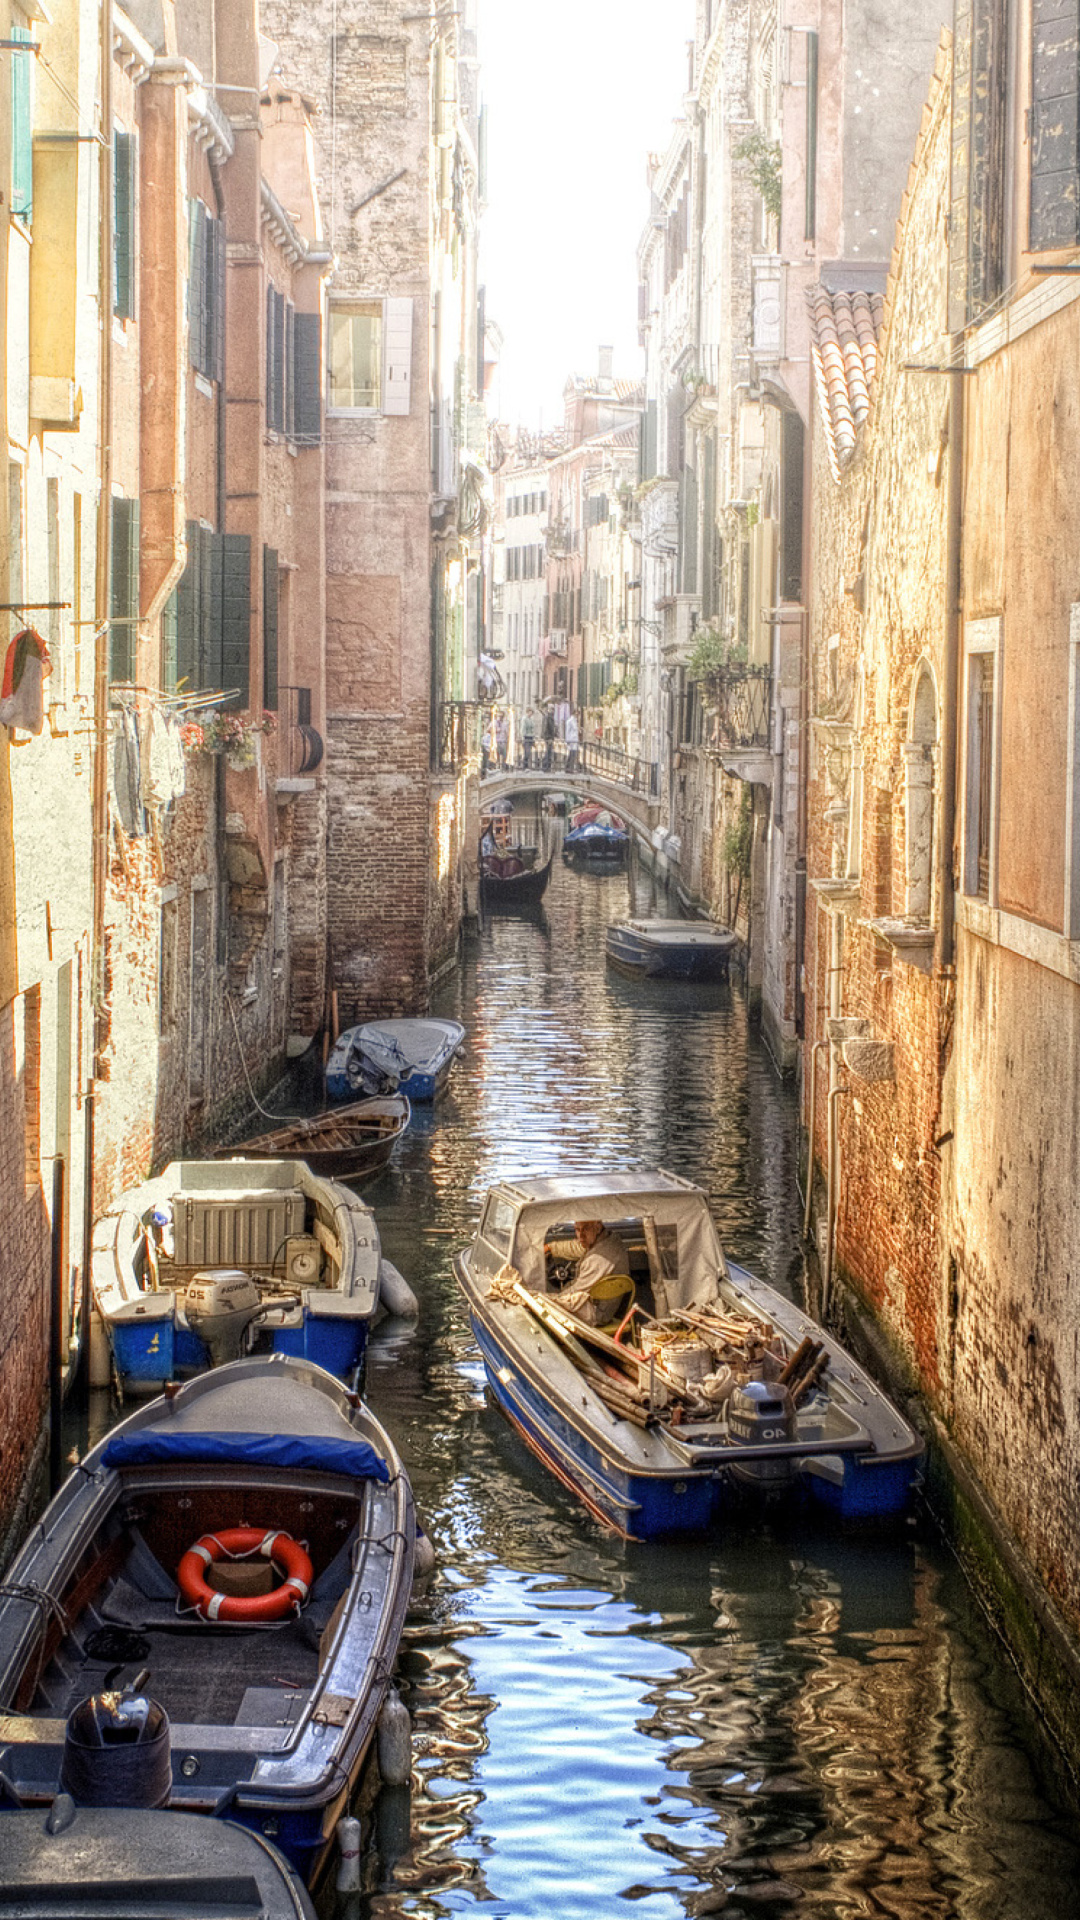 Canals of Venice Painting screenshot #1 1080x1920